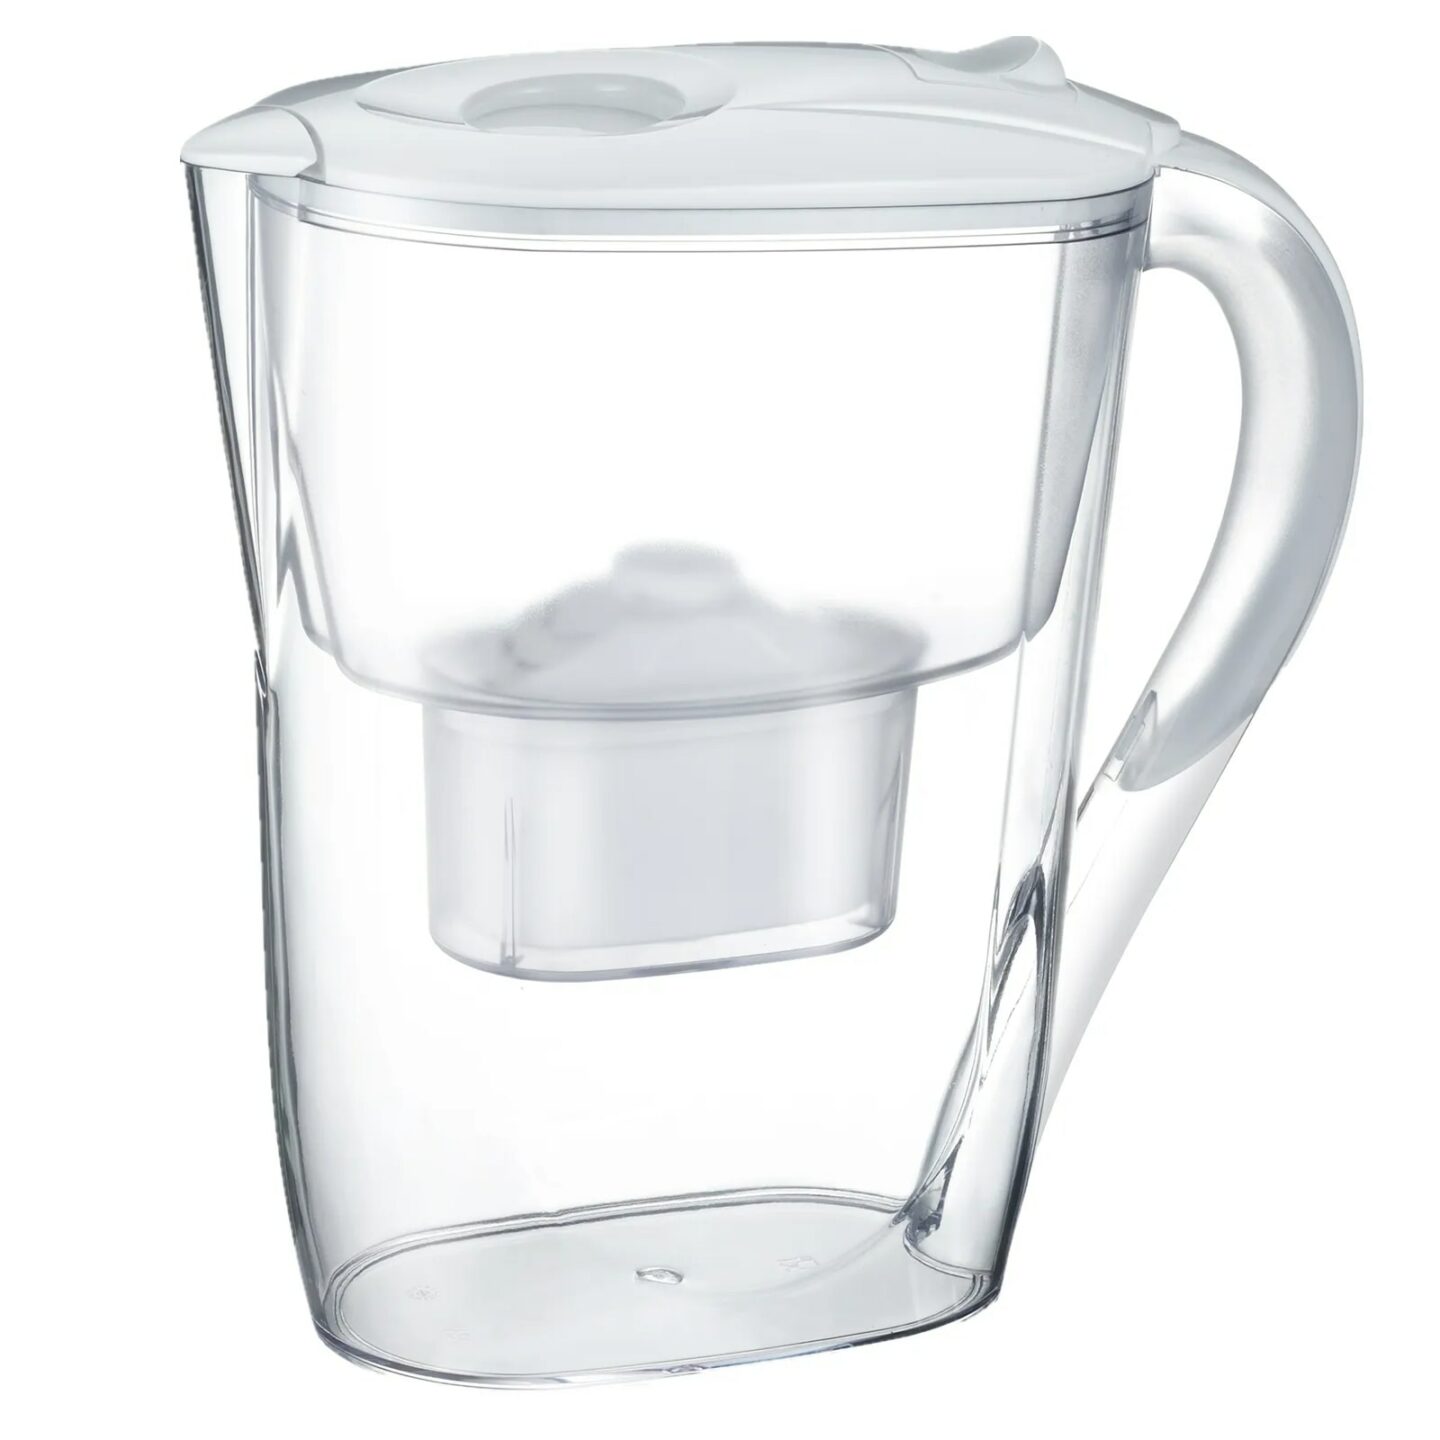 Water Jug Filter Pitcher: Buy 2.6L Water Filter Pitcher with Activated Carbon Filter Best Price in Sri Lanka | ido.lk